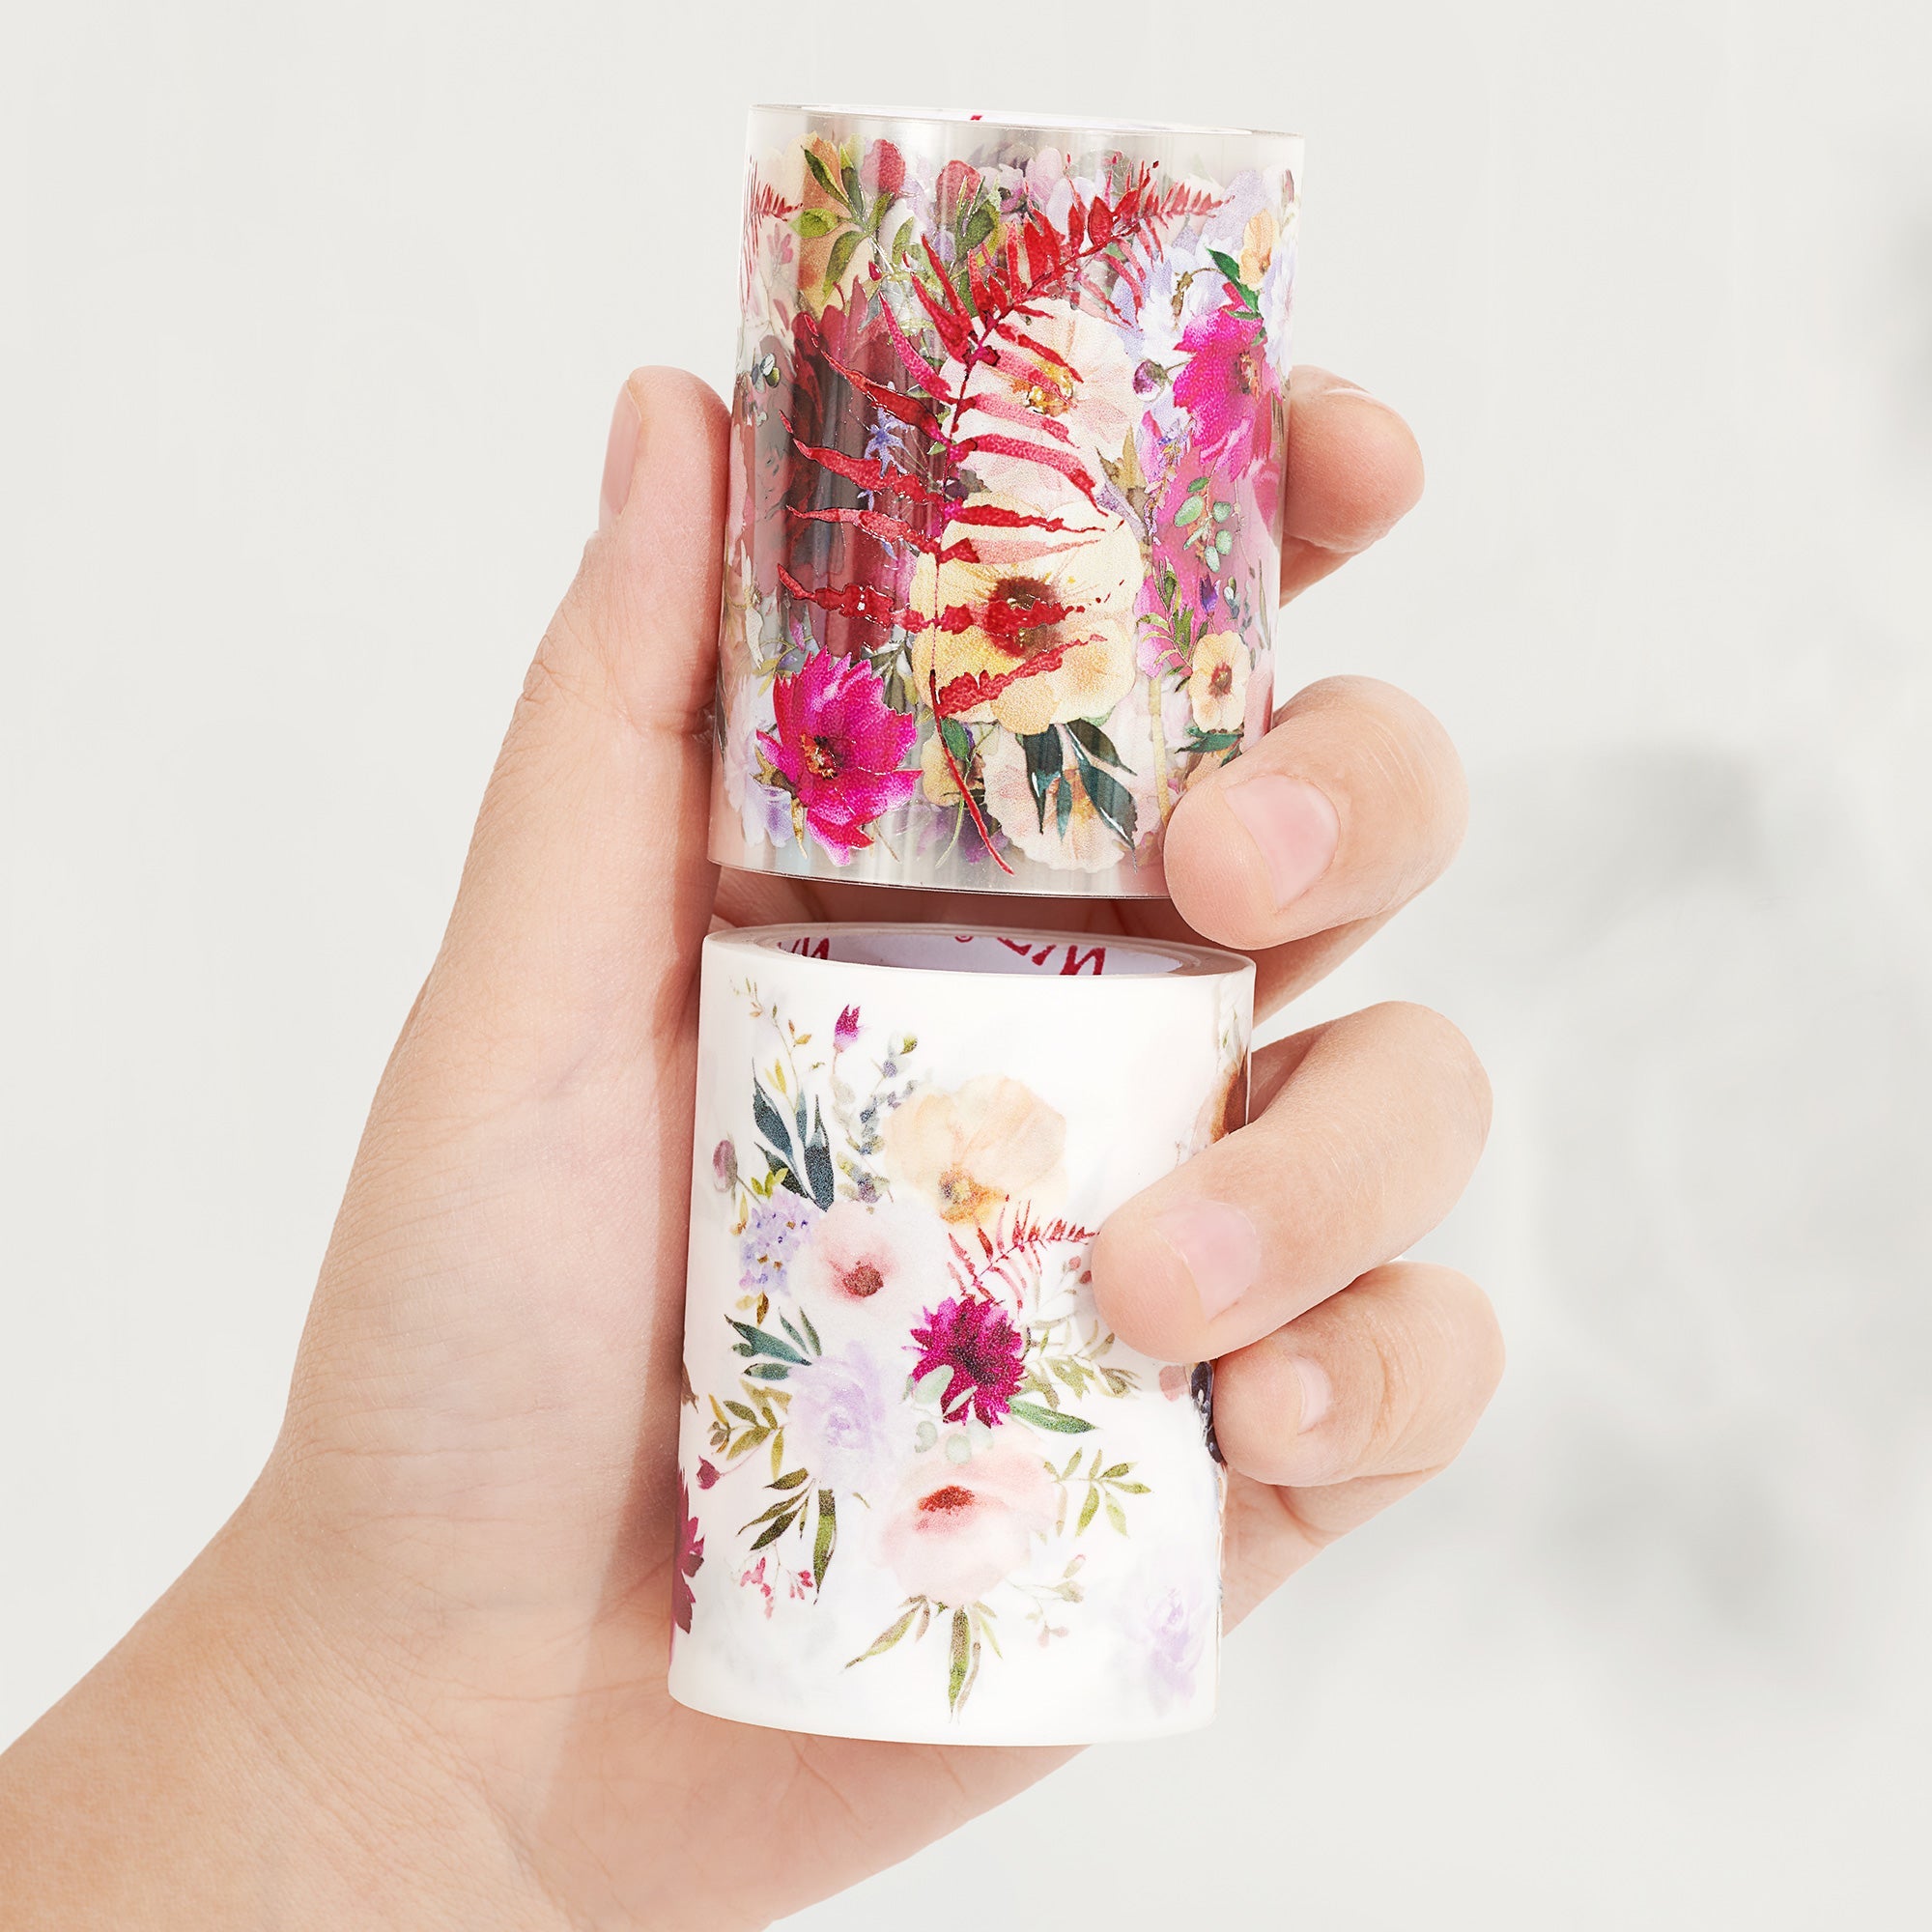  Lovely Garden Wide Washi / PET Tape by The Washi Tape Shop The Washi Tape Shop Perfumarie